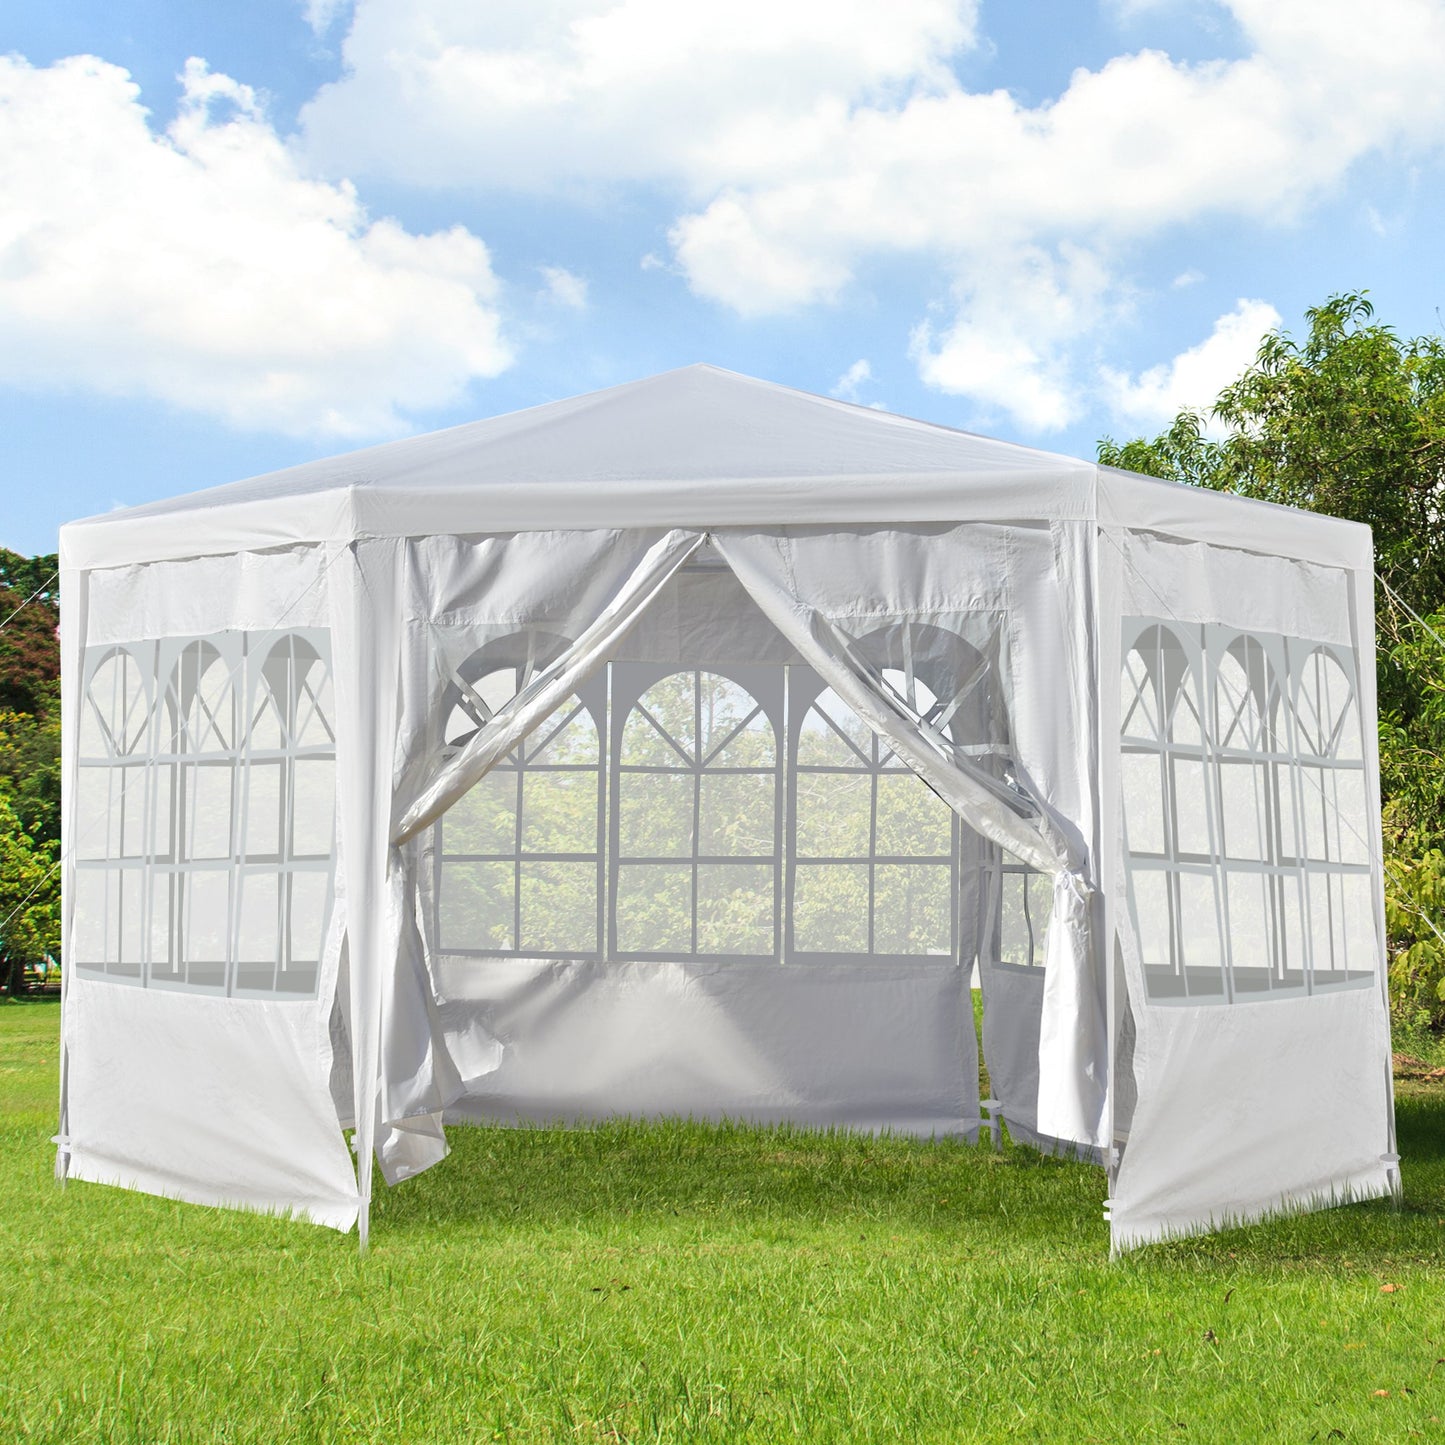 Outsunny 3.4m Outdoor Gazebo Canopy Party Tent with 6 Removable Side Walls for Garden